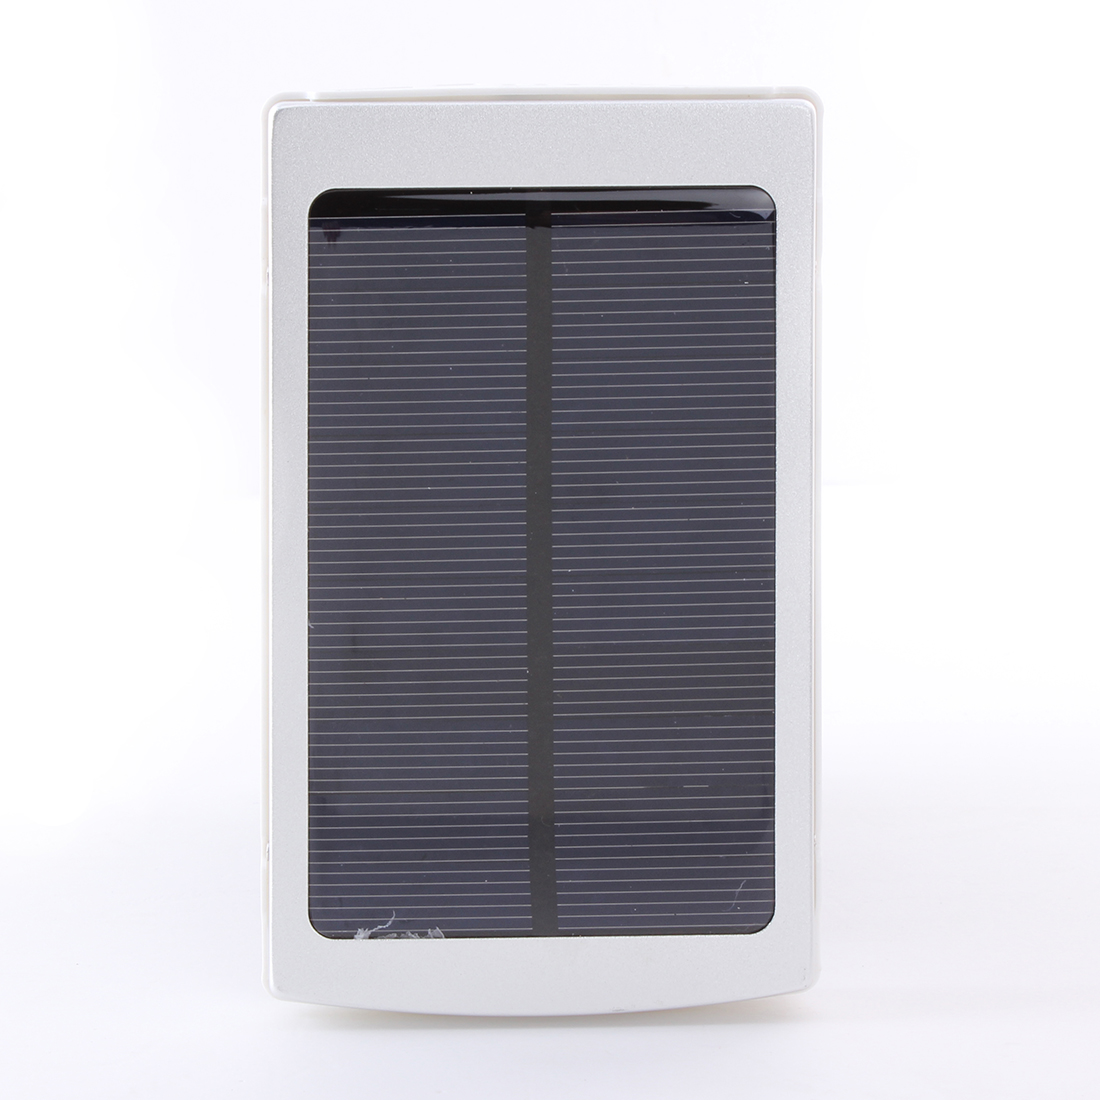 Solar-Charger-Mobile-Phone-Cell-Phone-Power-Bank-Charger-for-Camping-Hiking-Travel-955194-3